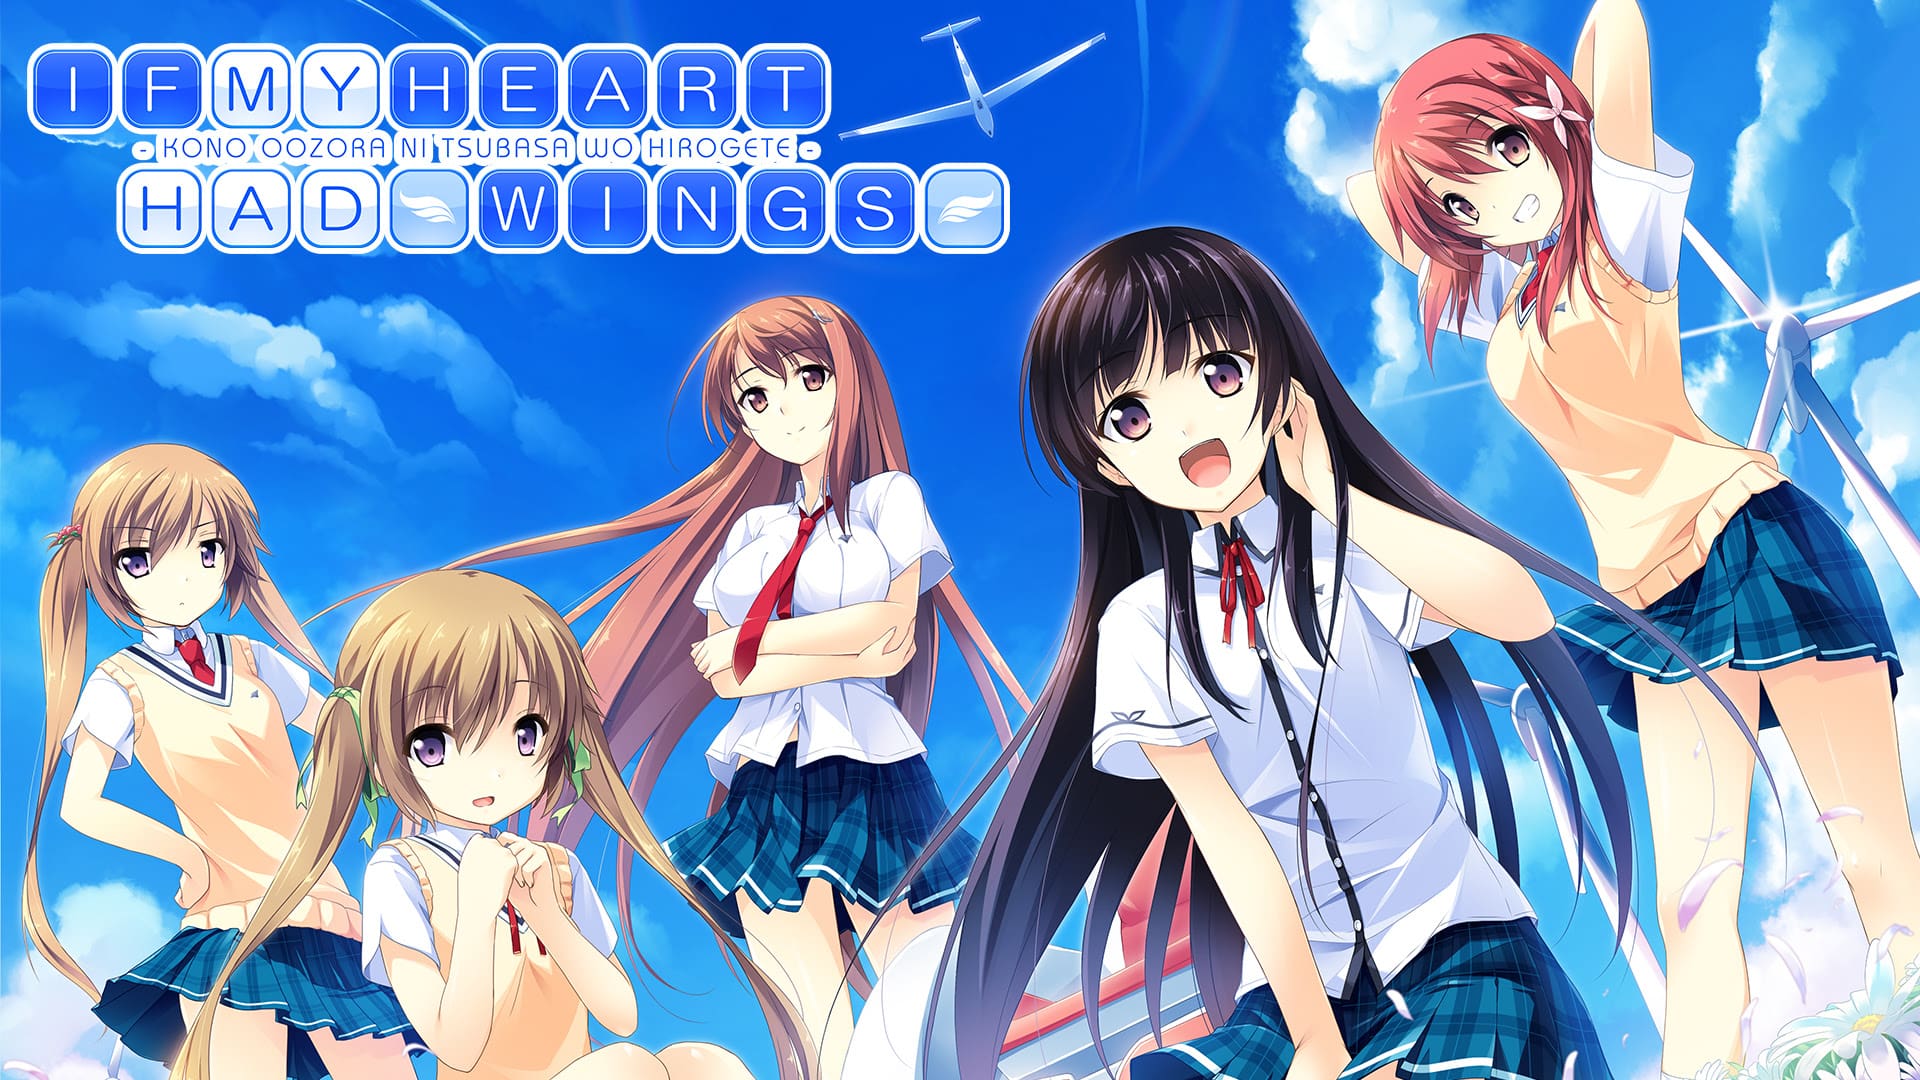 Visual Novel If My Heart Had Wings coming to Switch soon.